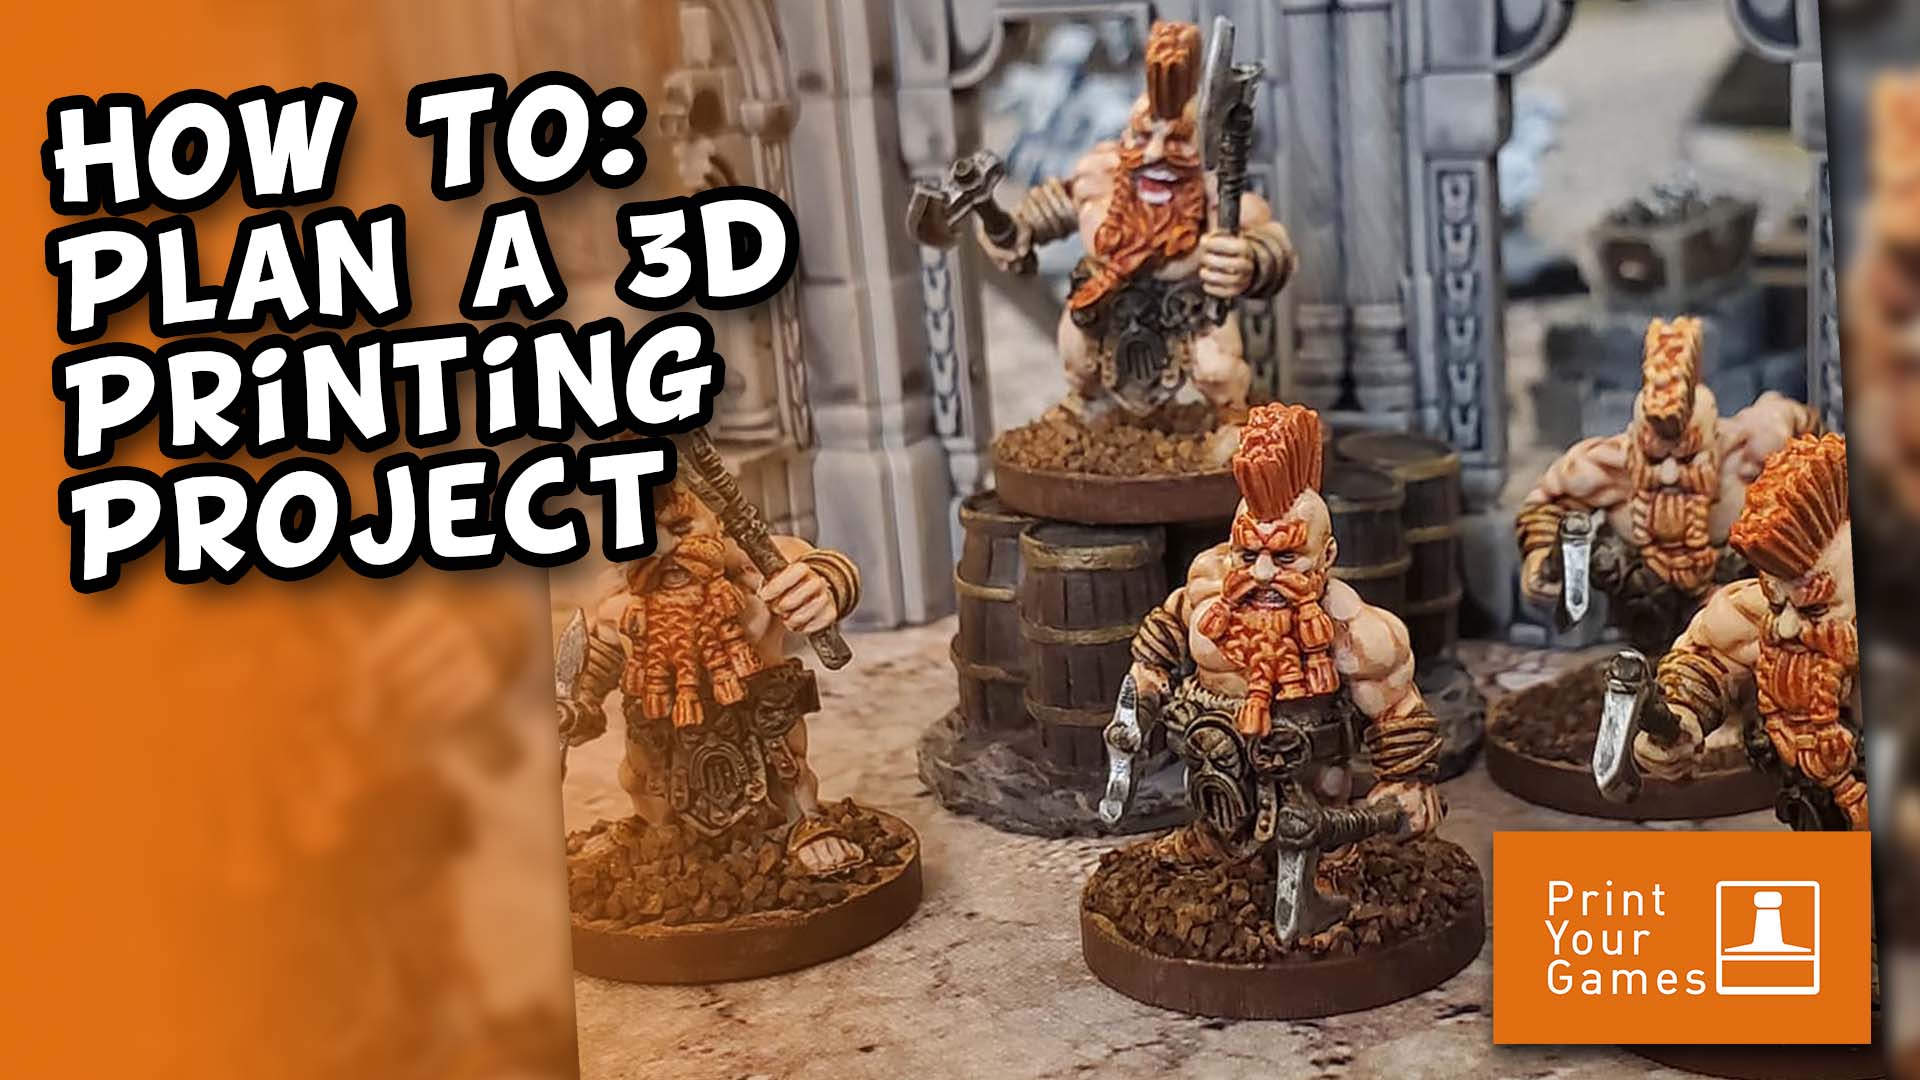 How to: Plan a 3d Printing Project